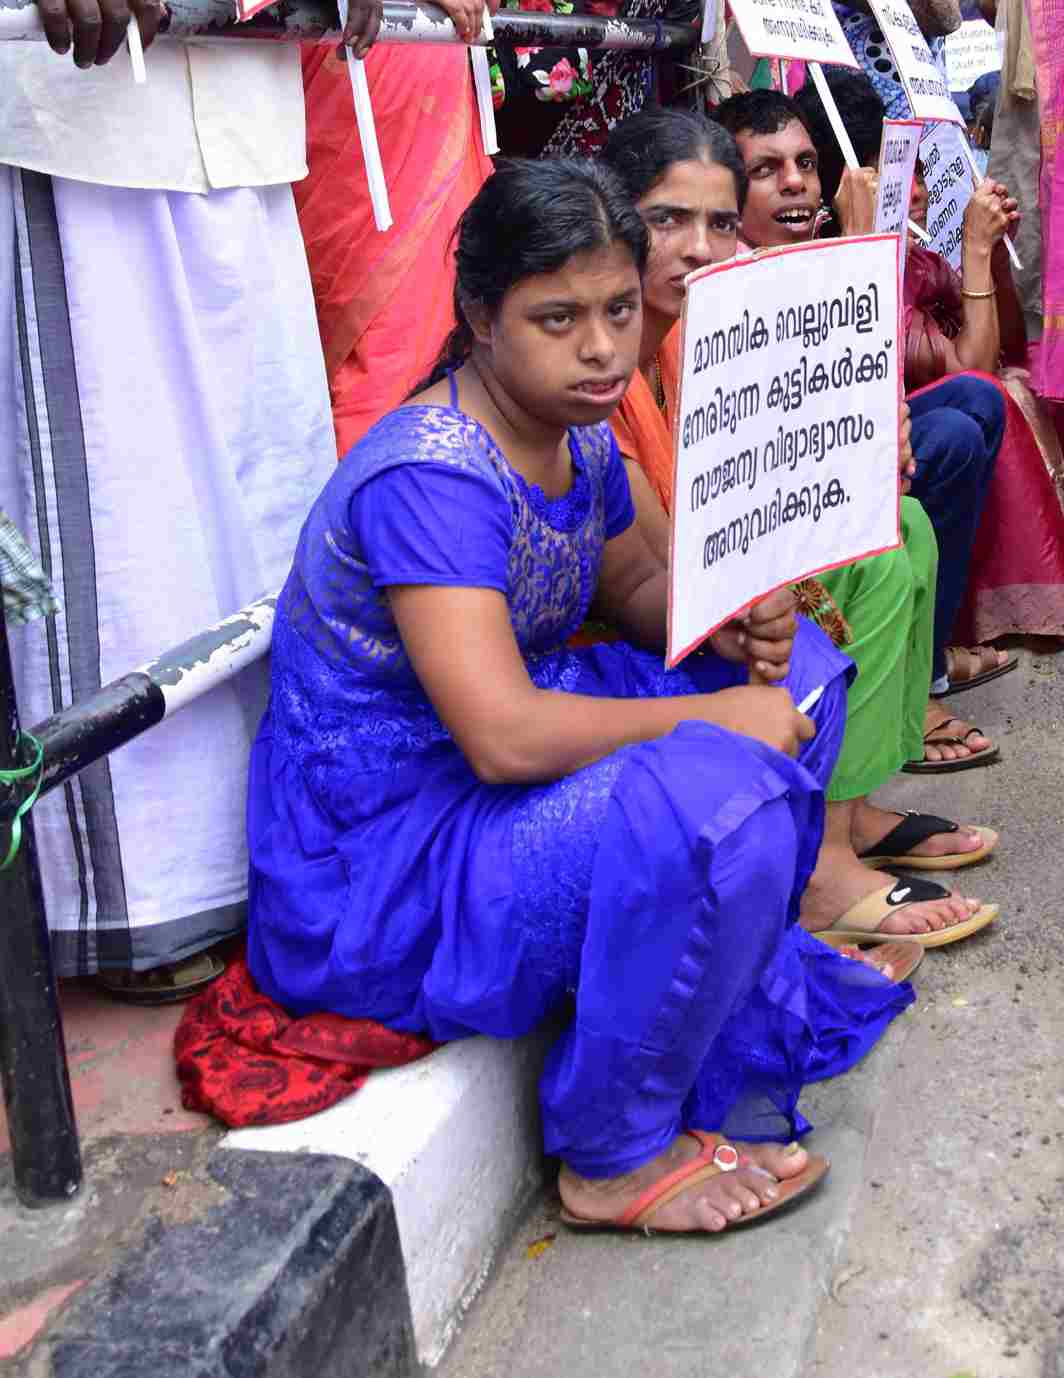 NO FAULT OF OURS: Children participate in a hunger strike organised by the Association for Intellectually Disabled to protest against government apathy towards disabled students and special schools accommodating them, in front of Kerala Secretariat in Thiruvananthapuram, UNI